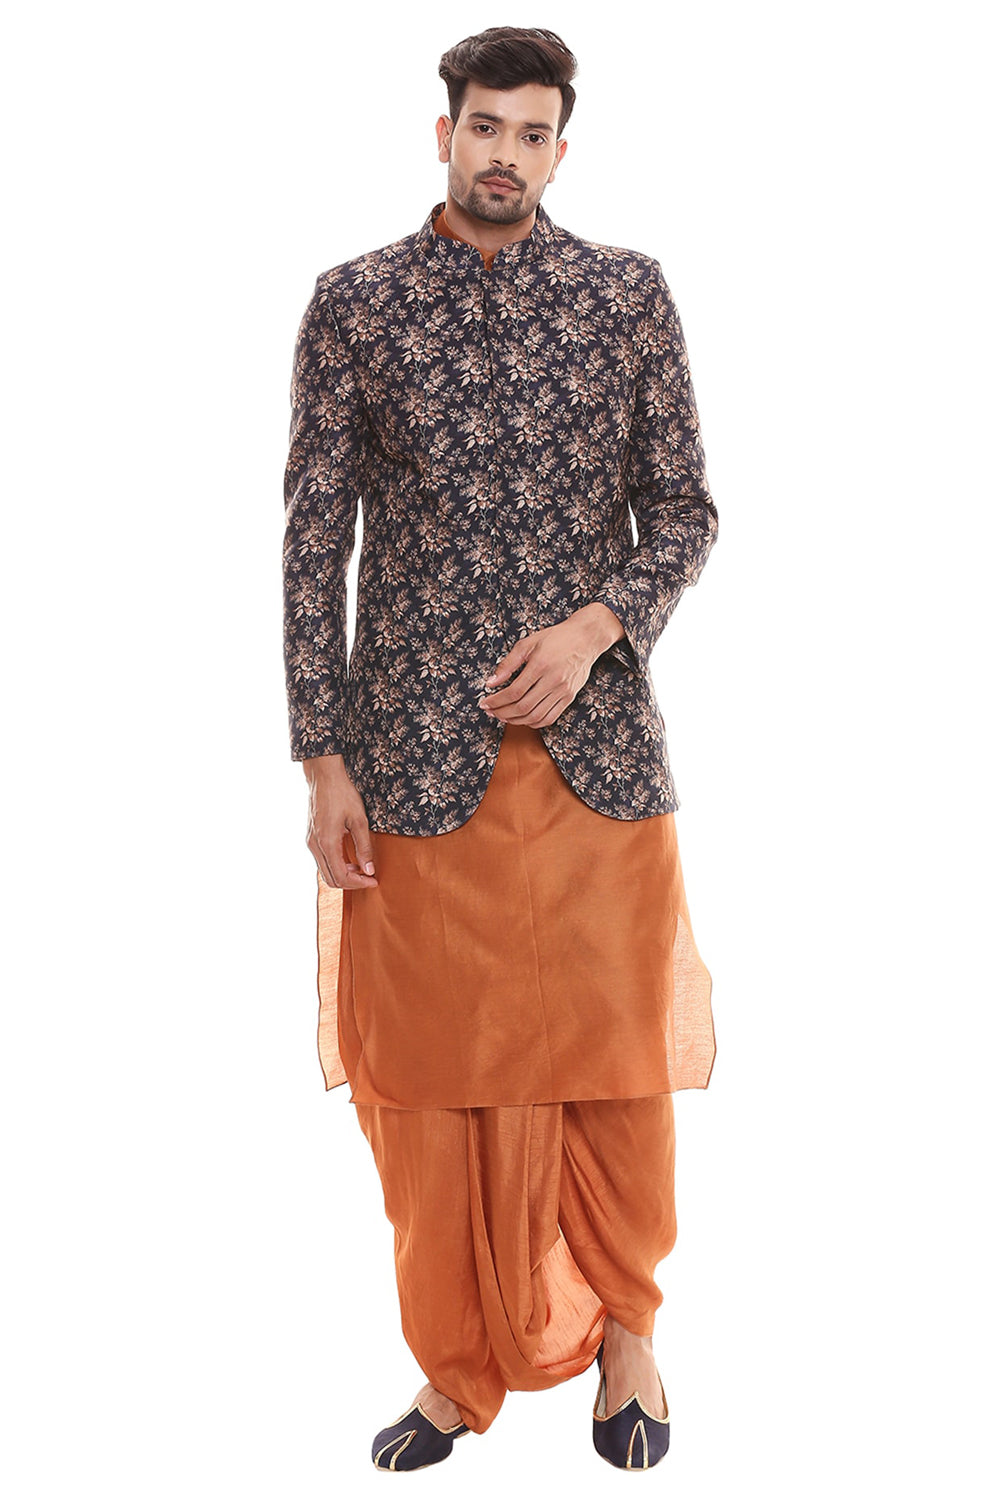 Rust Orange Collared Kurta With Dhoti Pants Paired With Applique Floral Jacket